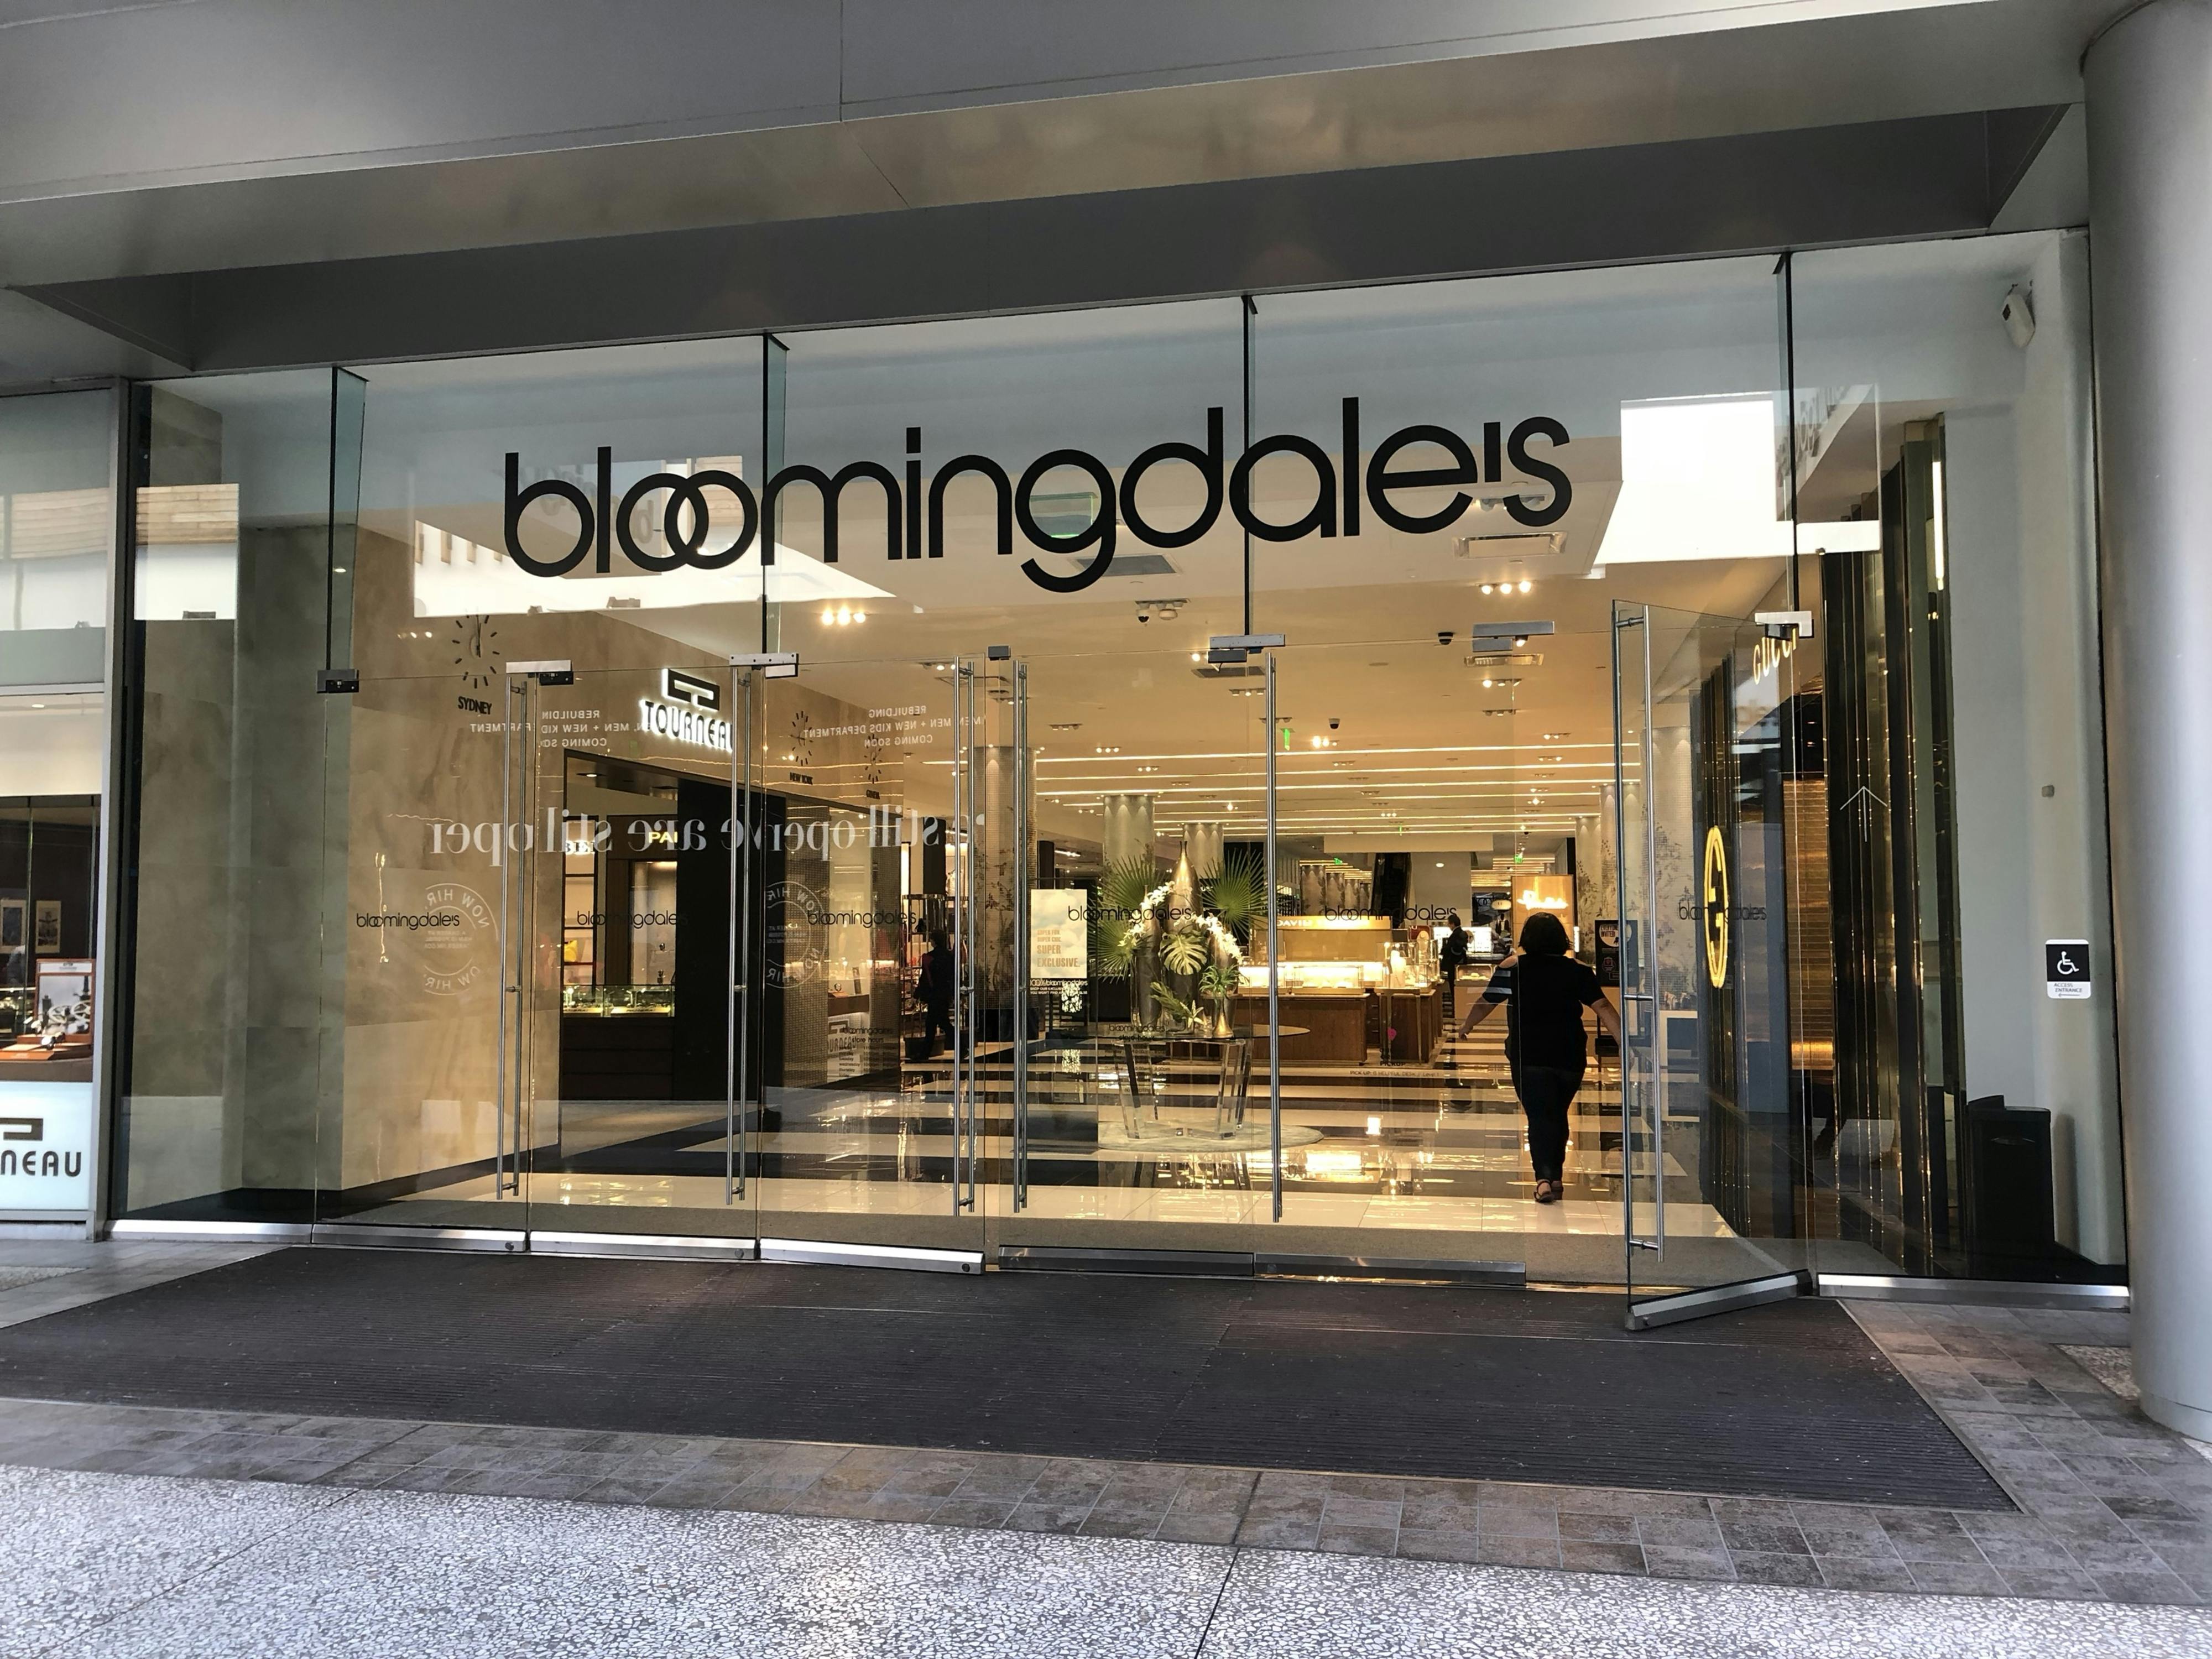 Bloomingdale's retail store location, store front.